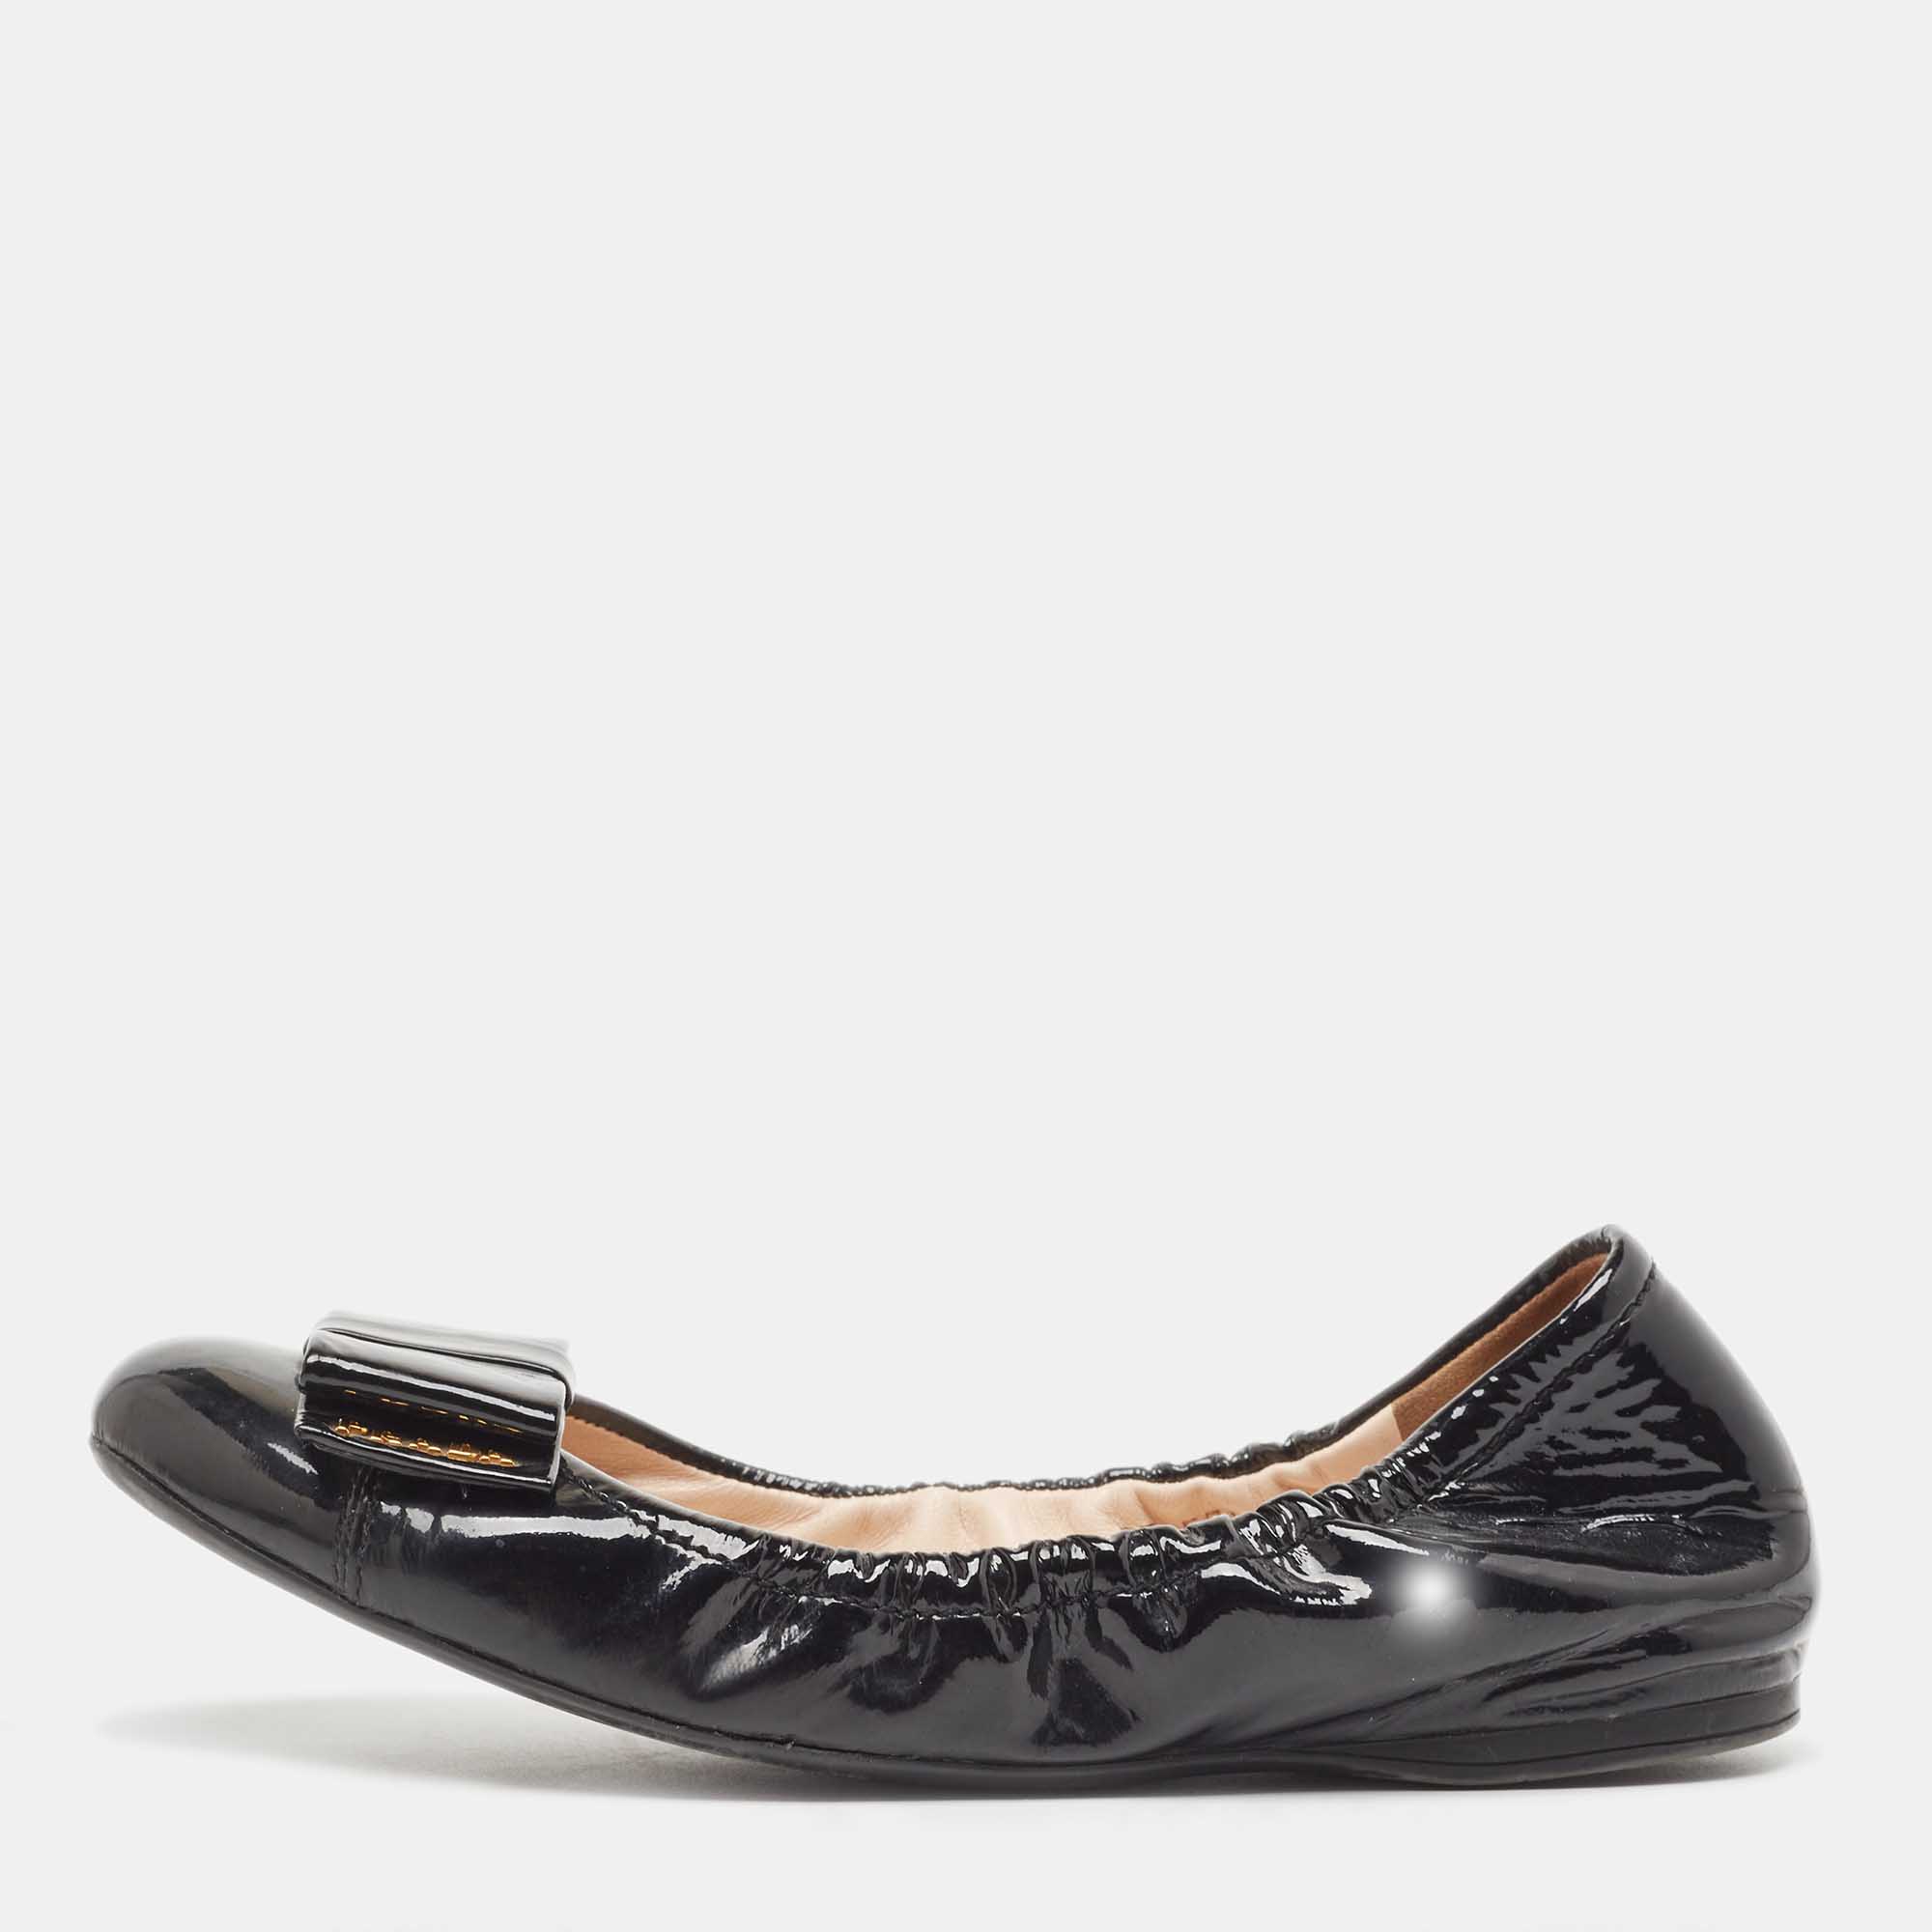 Pre-owned Prada Black Patent Leather Bow Scrunch Ballet Flats Size 36.5